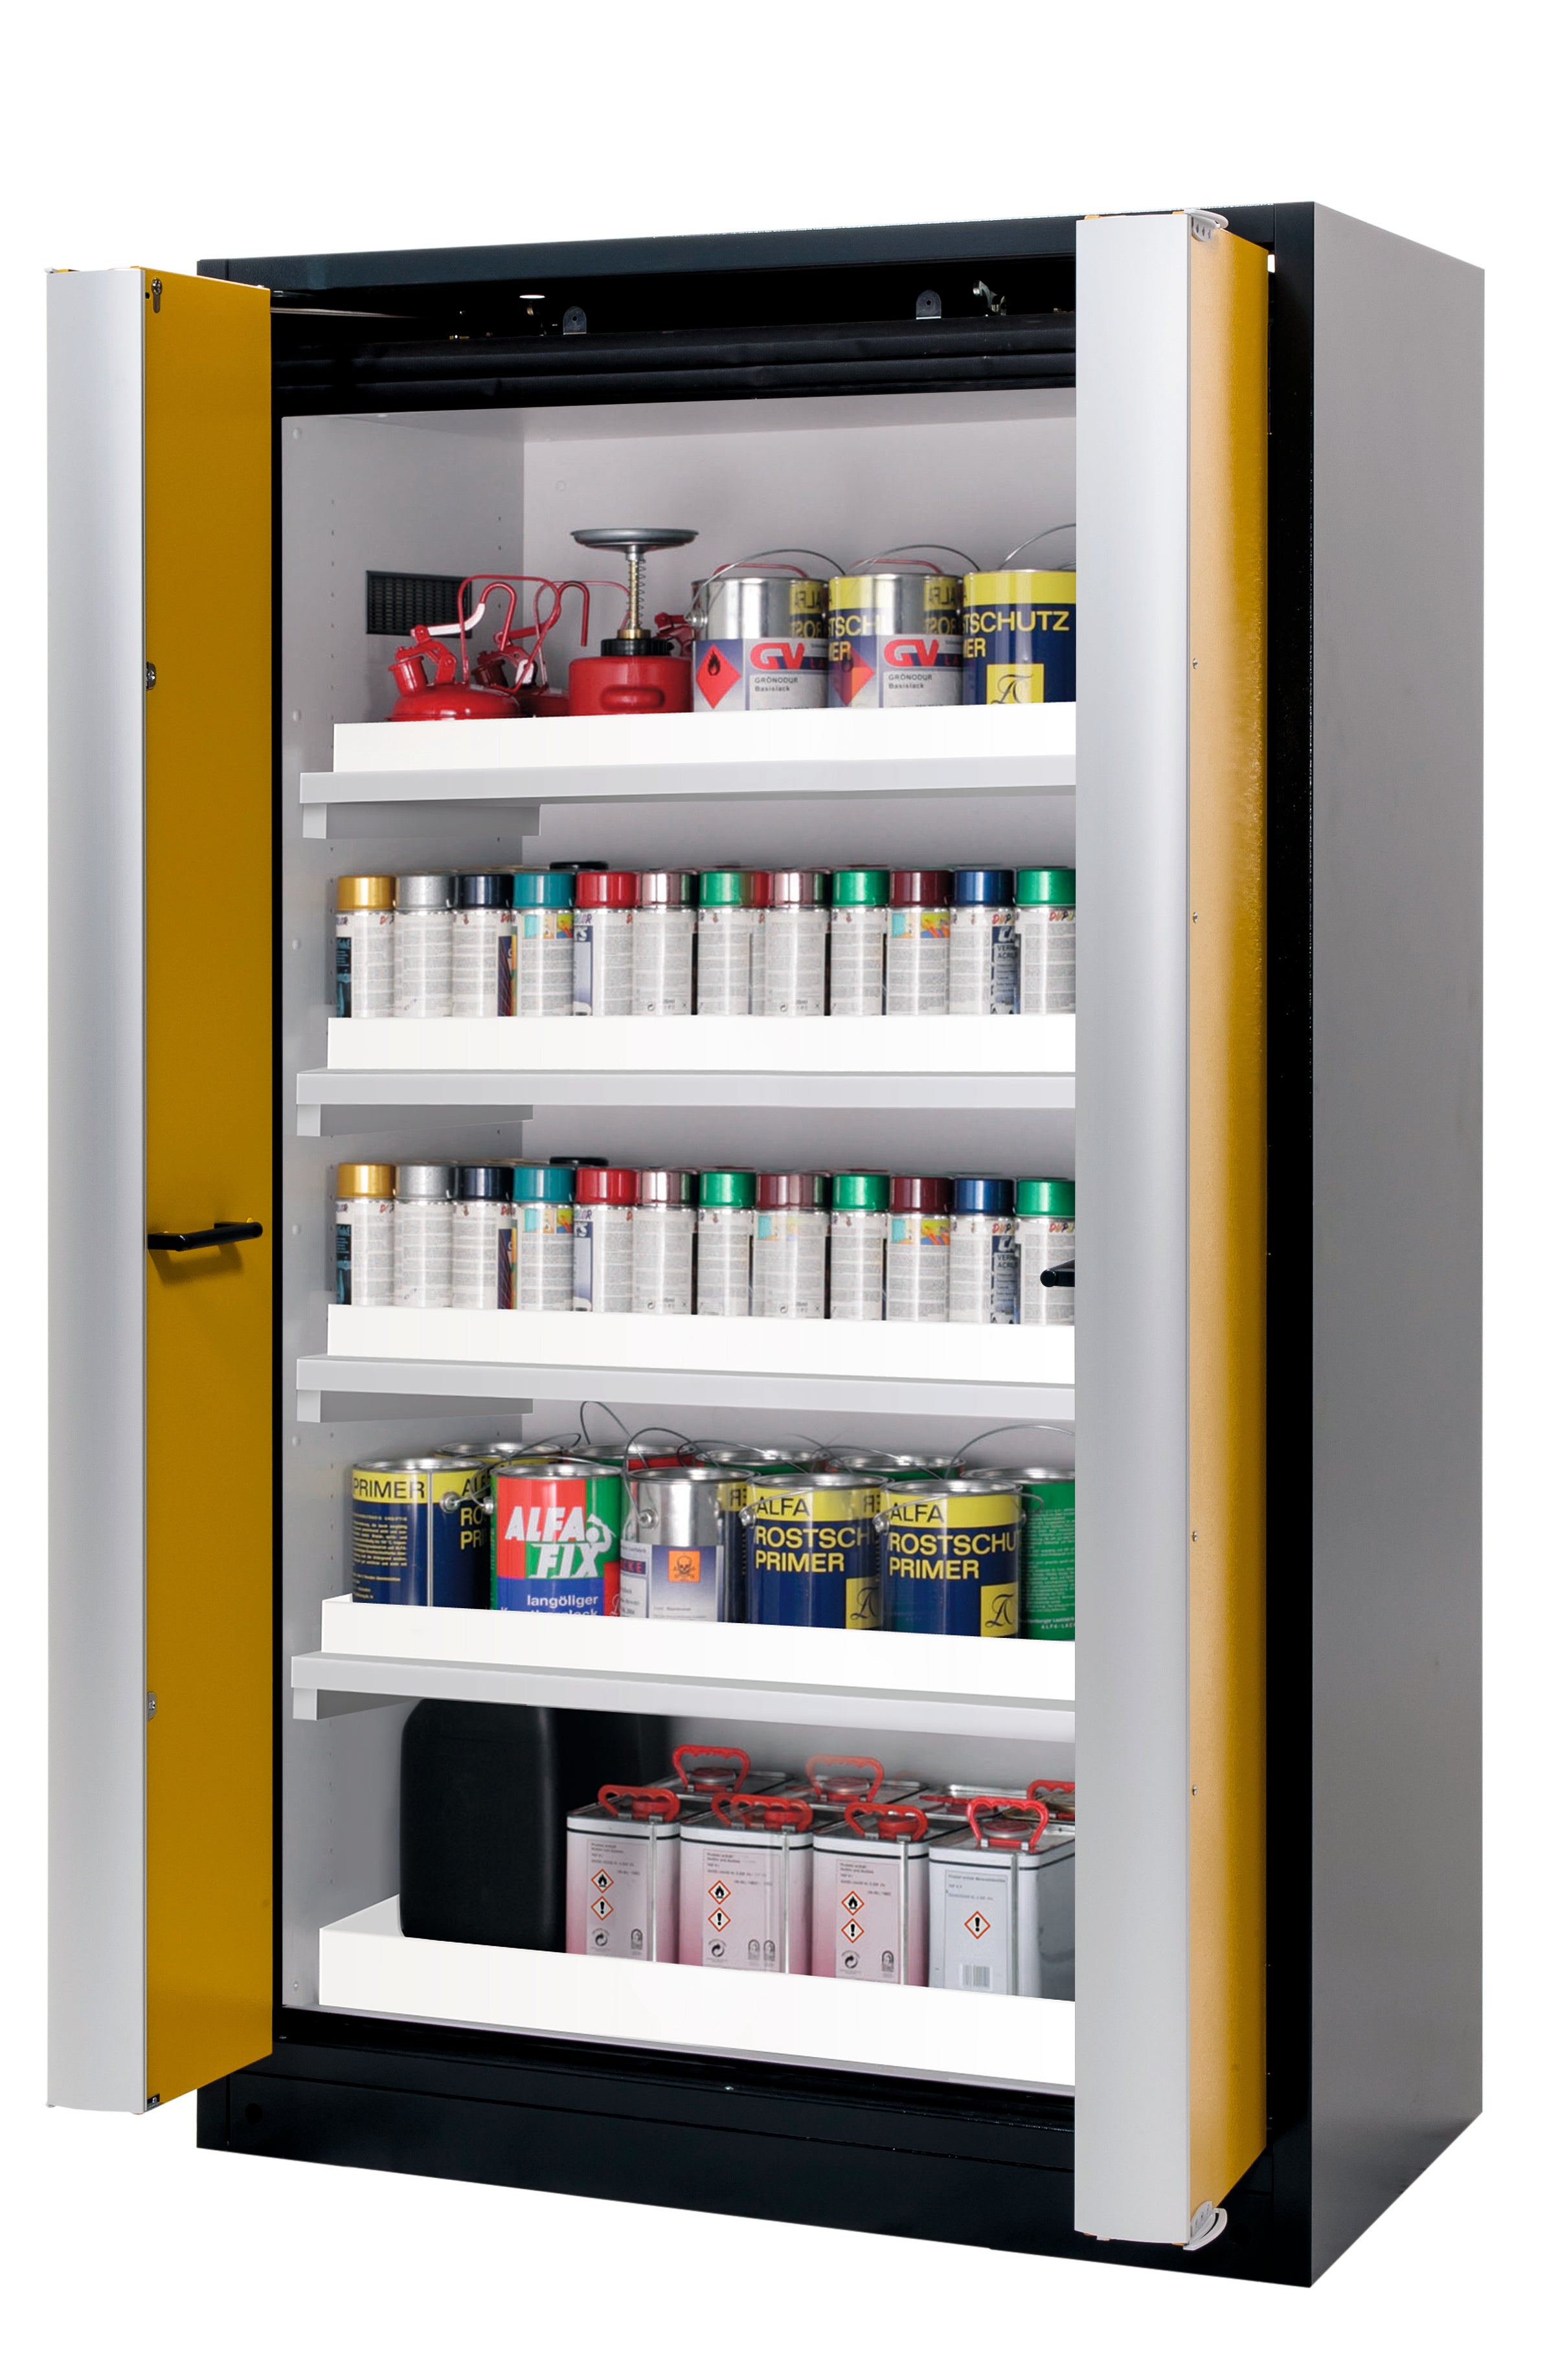 Type 90 safety cabinet Q-PHOENIX-90 model Q90.195.120.FD in safety yellow RAL 1004 with 4x standard tray base (polypropylene)